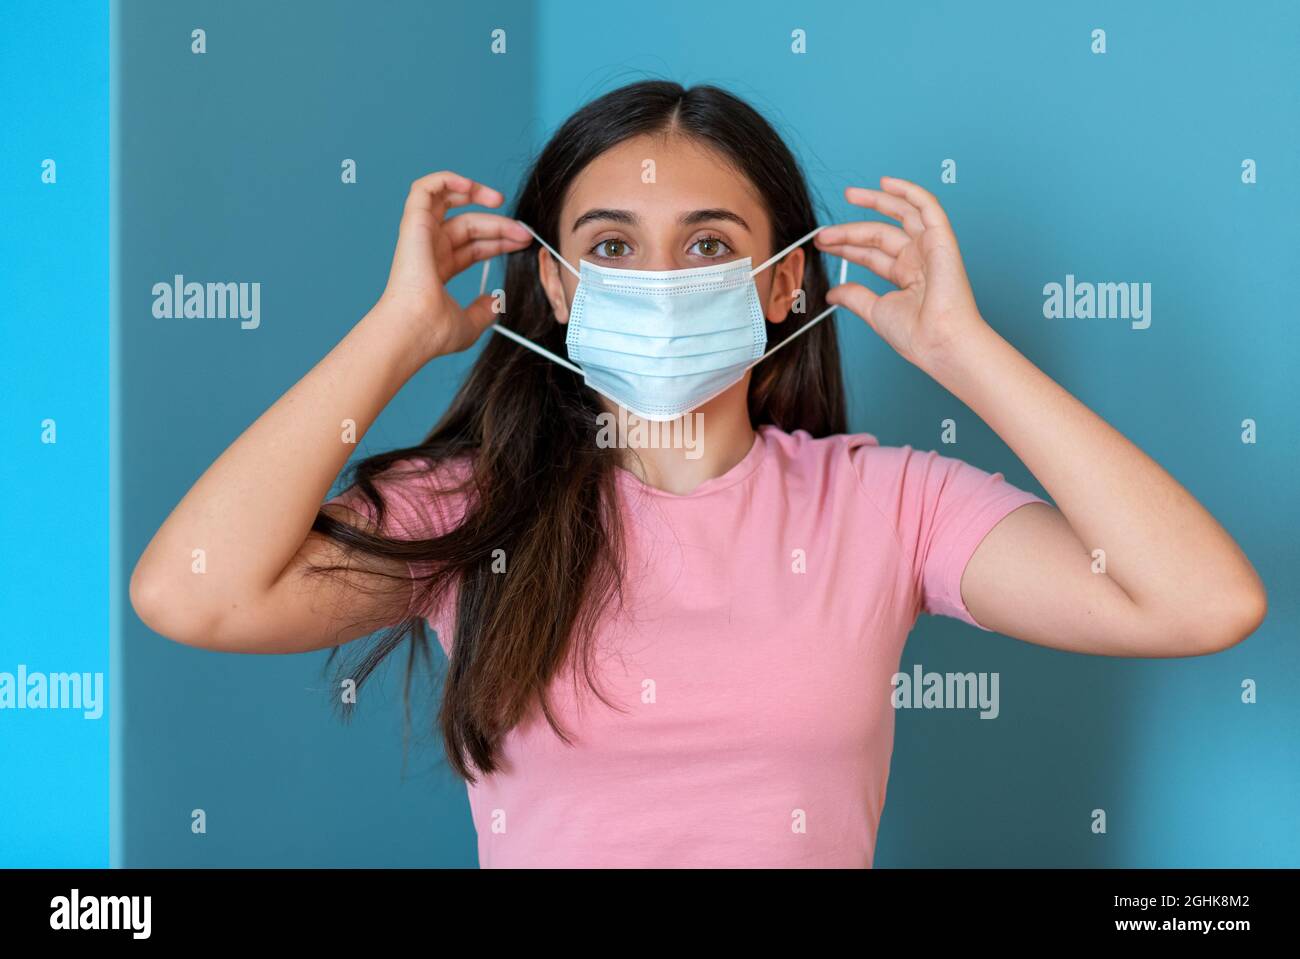 Teen female putting on protective medical mask for coronavirus prevention against blue background Stock Photo